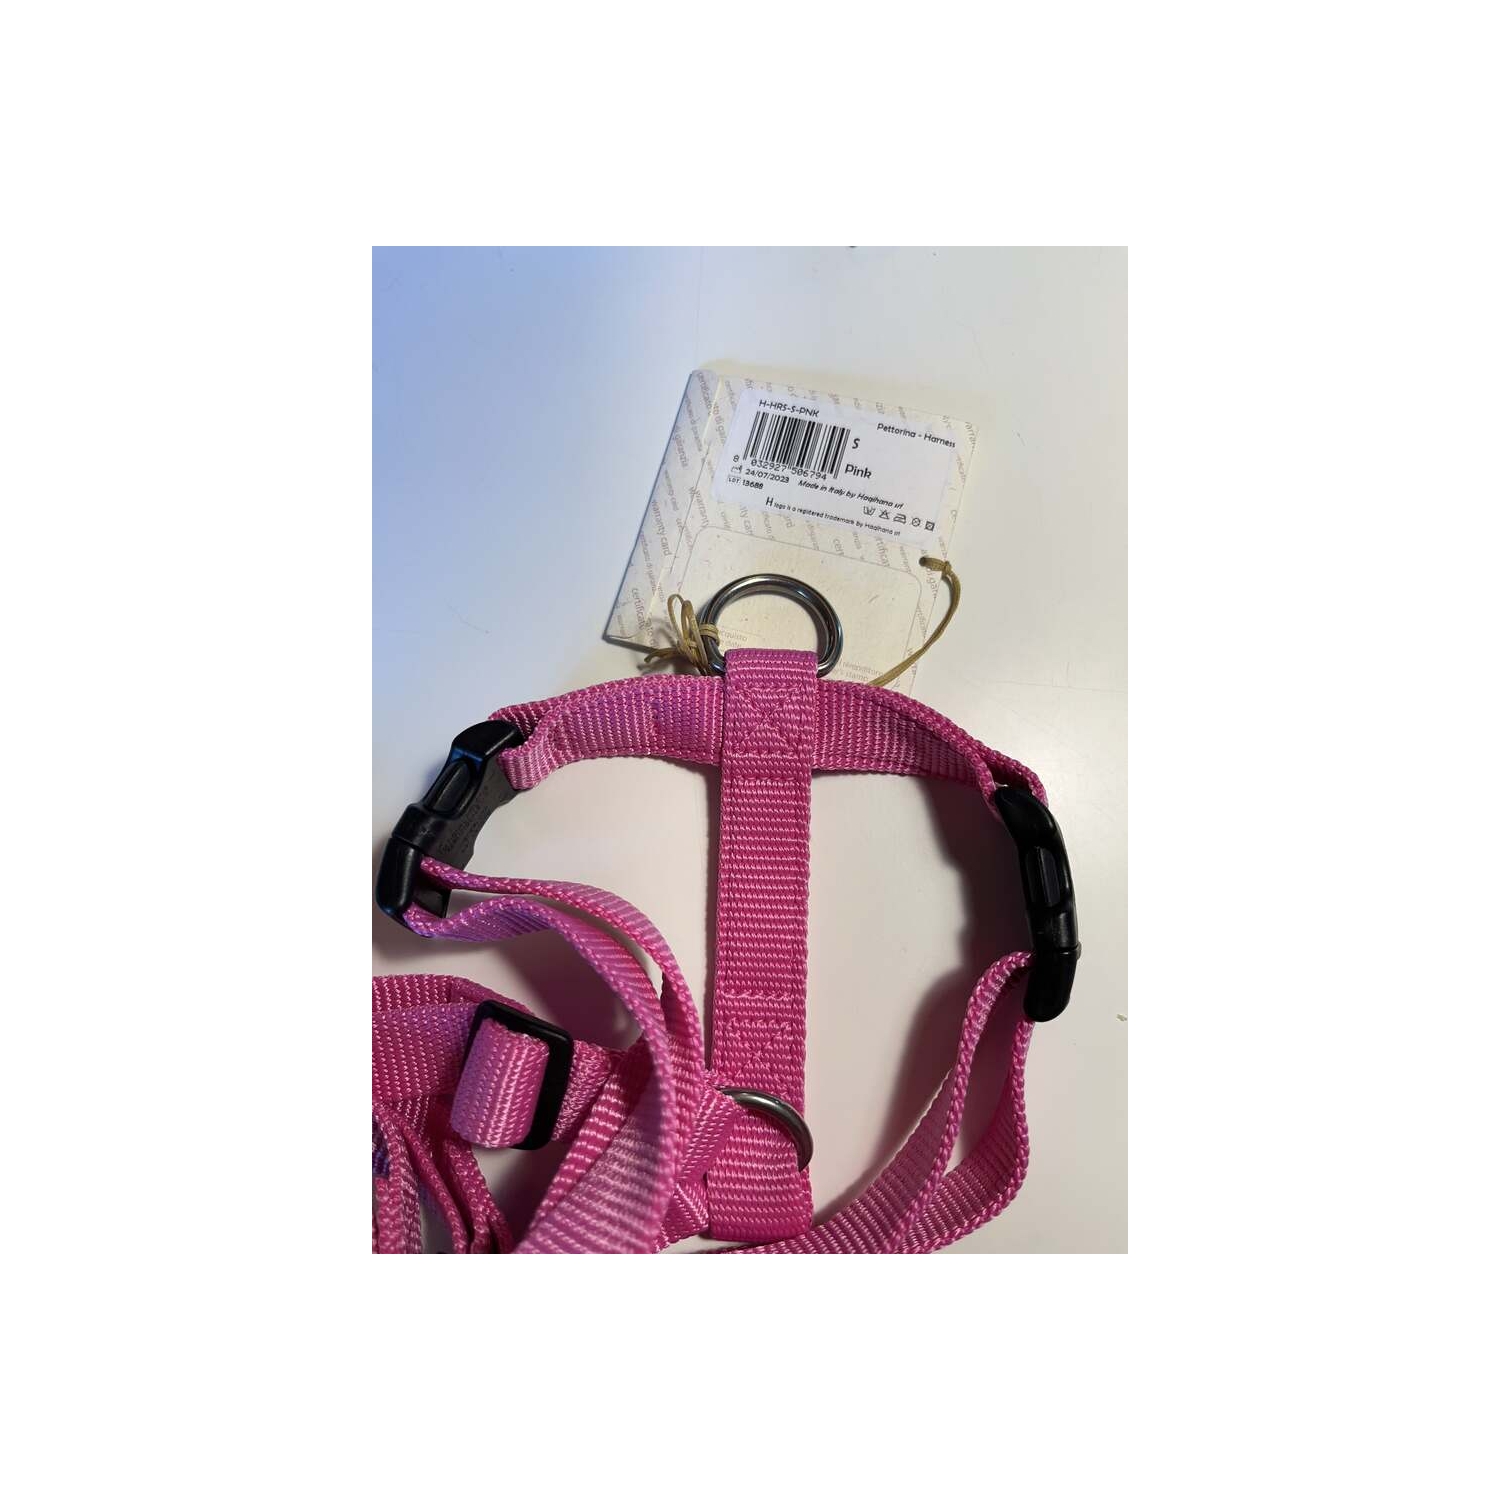 Harness Pink - size S - missing the size label